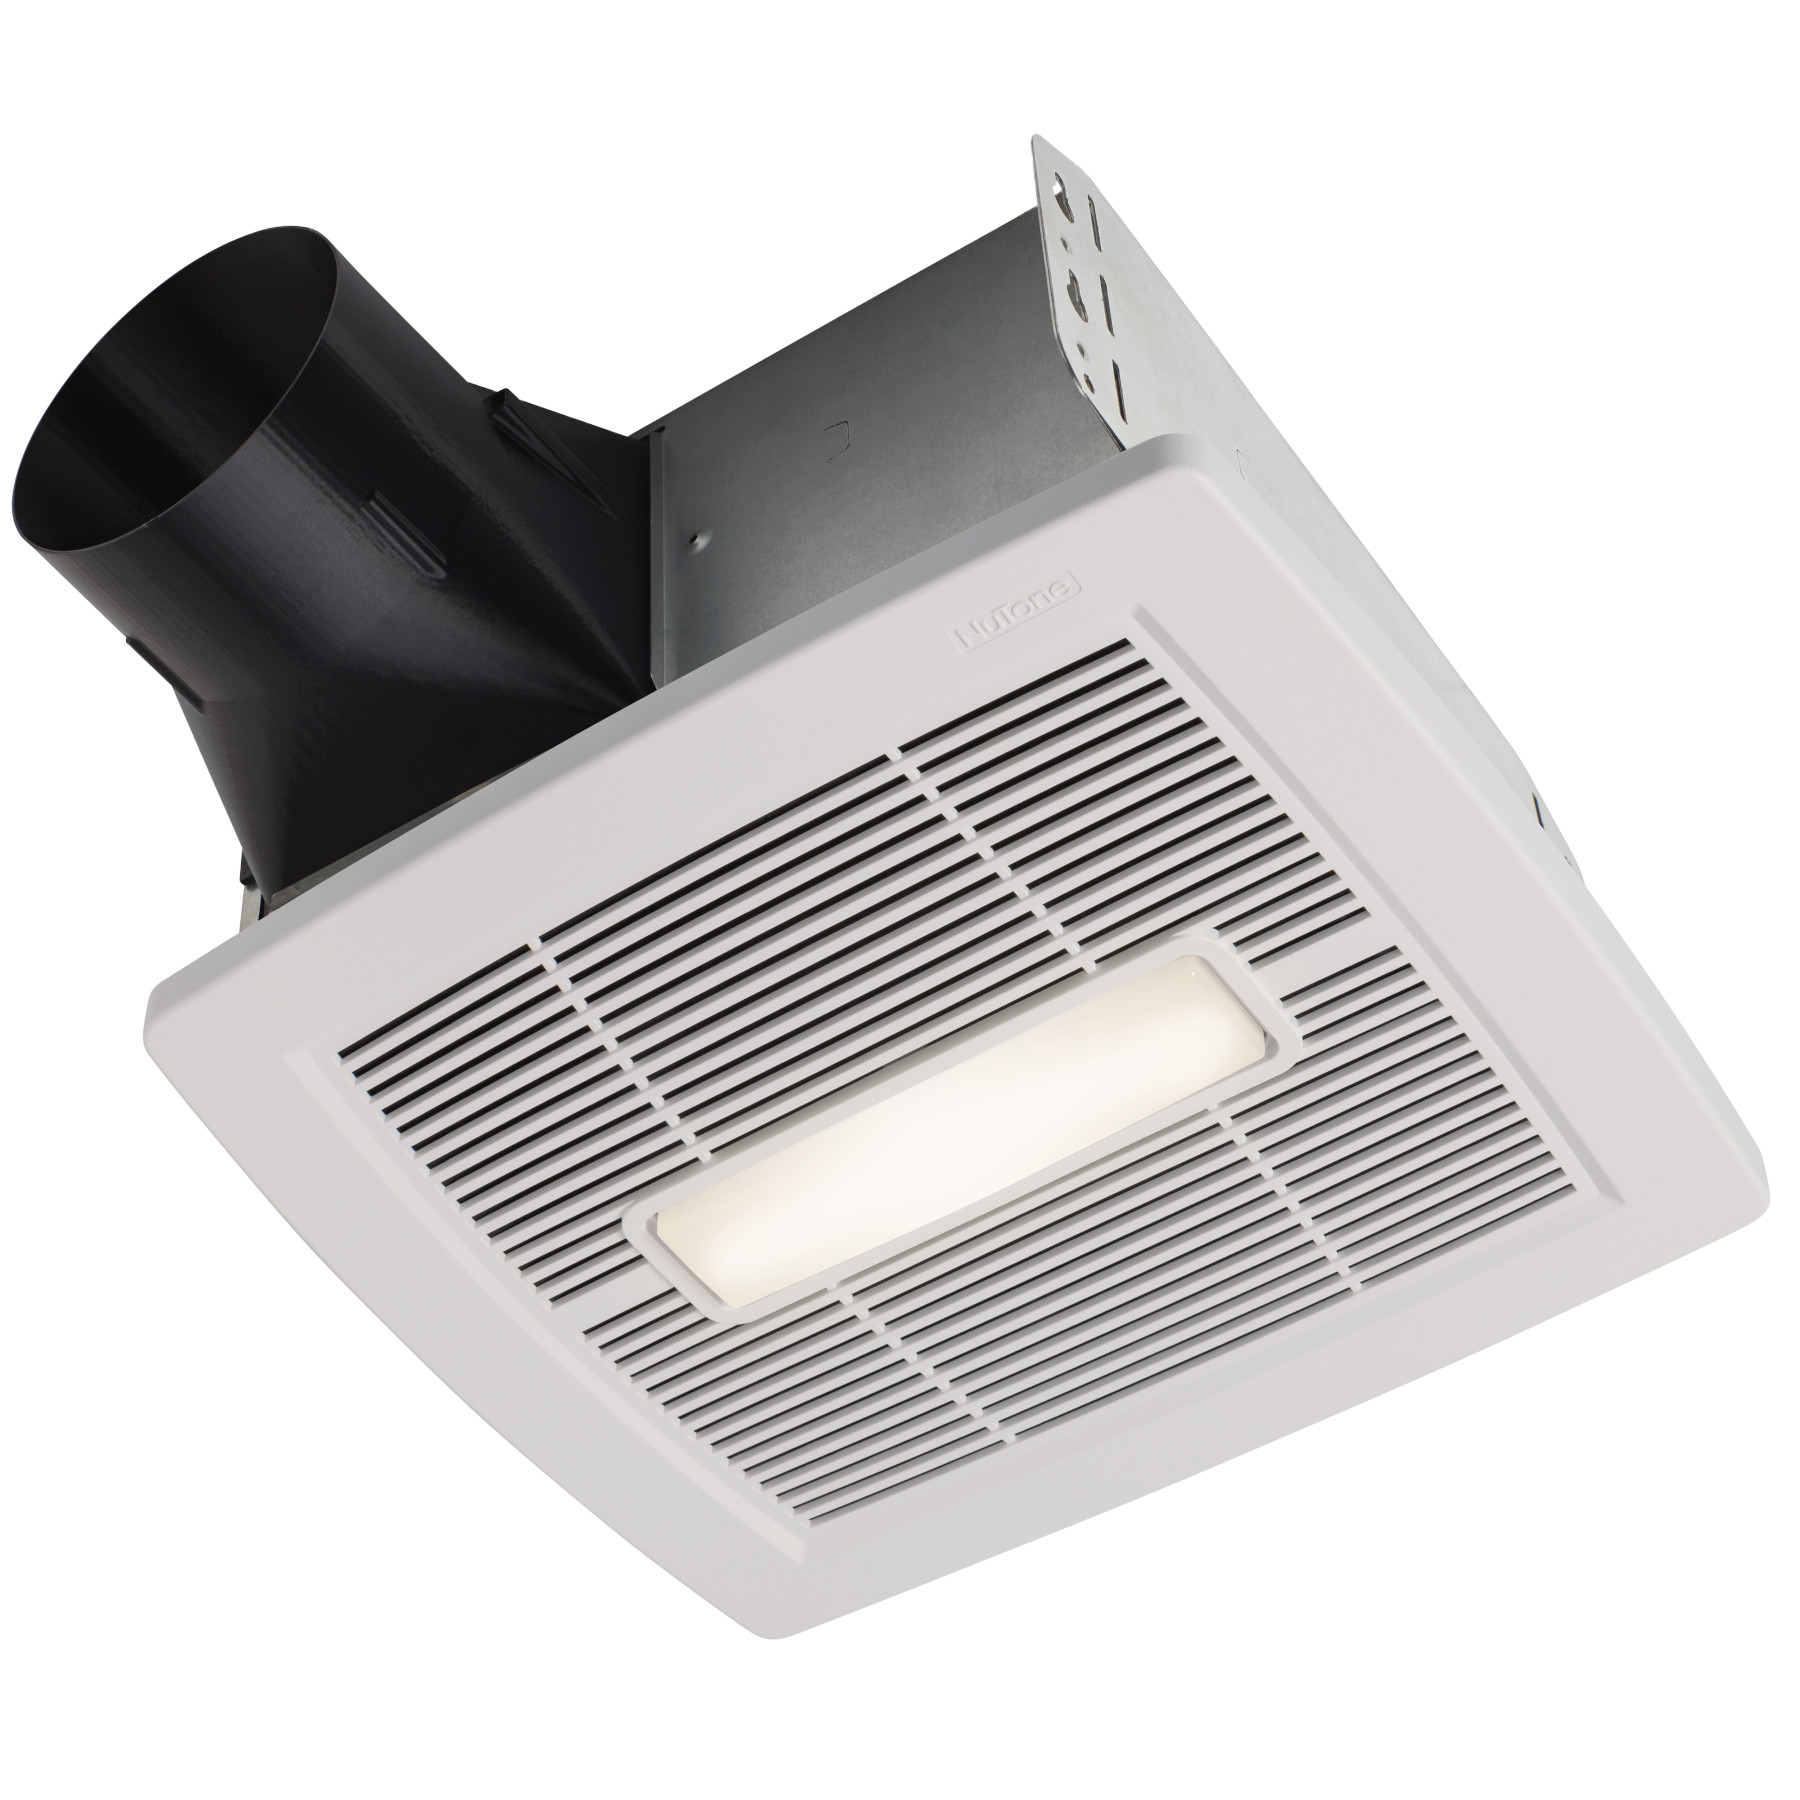 **DISCONTINUED** Flex Series 80 CFM Ceiling Roomside Installation Bathroom Exhaust Fan with Light, ENERGY STAR*